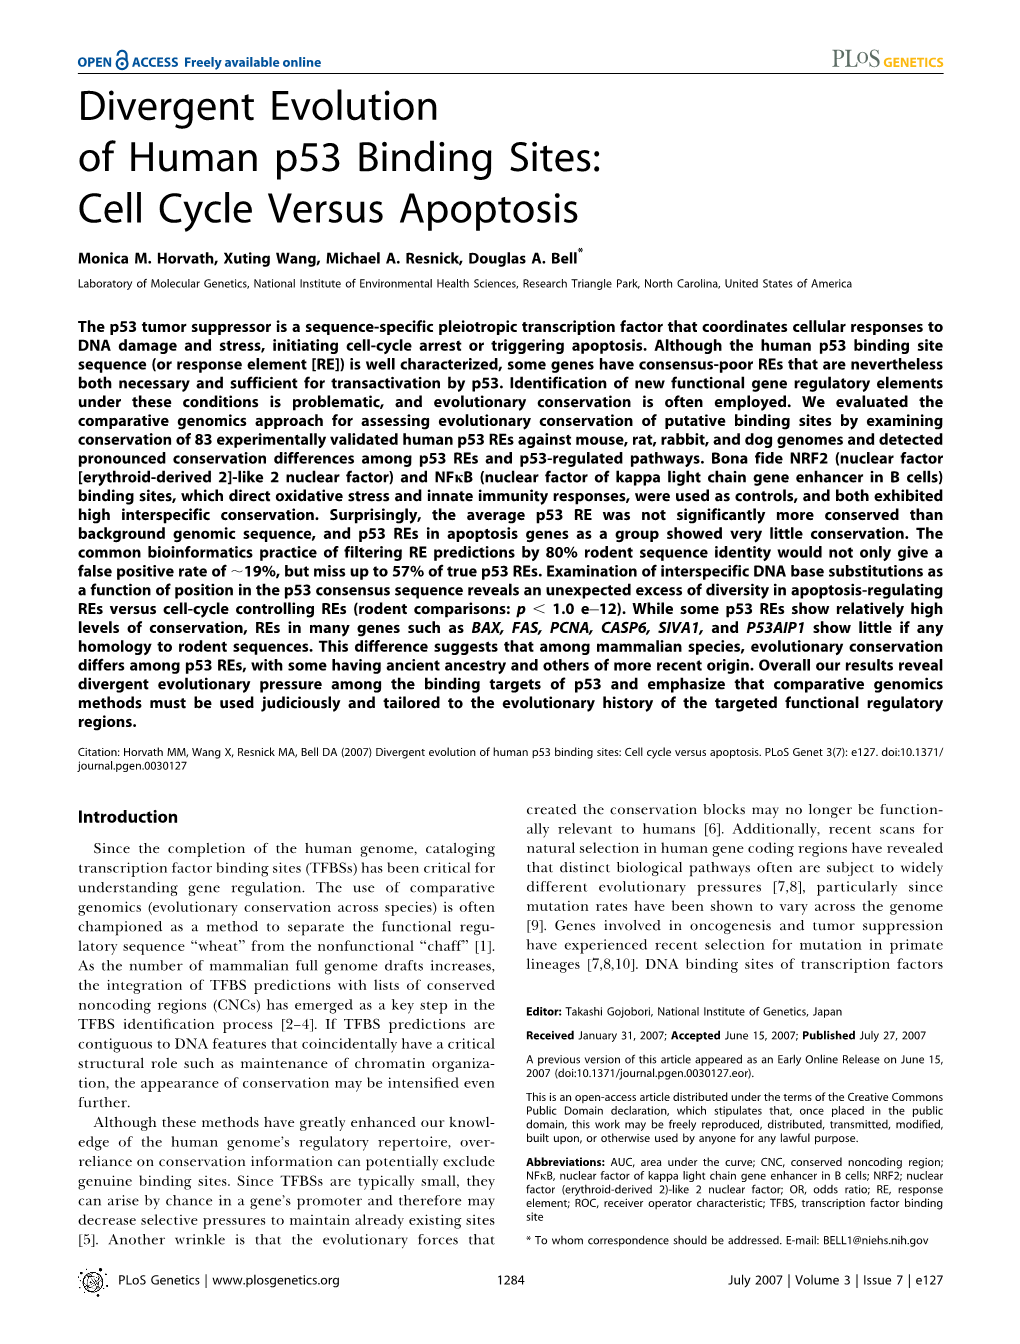 Divergent Evolution of Human P53 Binding Sites: Cell Cycle Versus Apoptosis